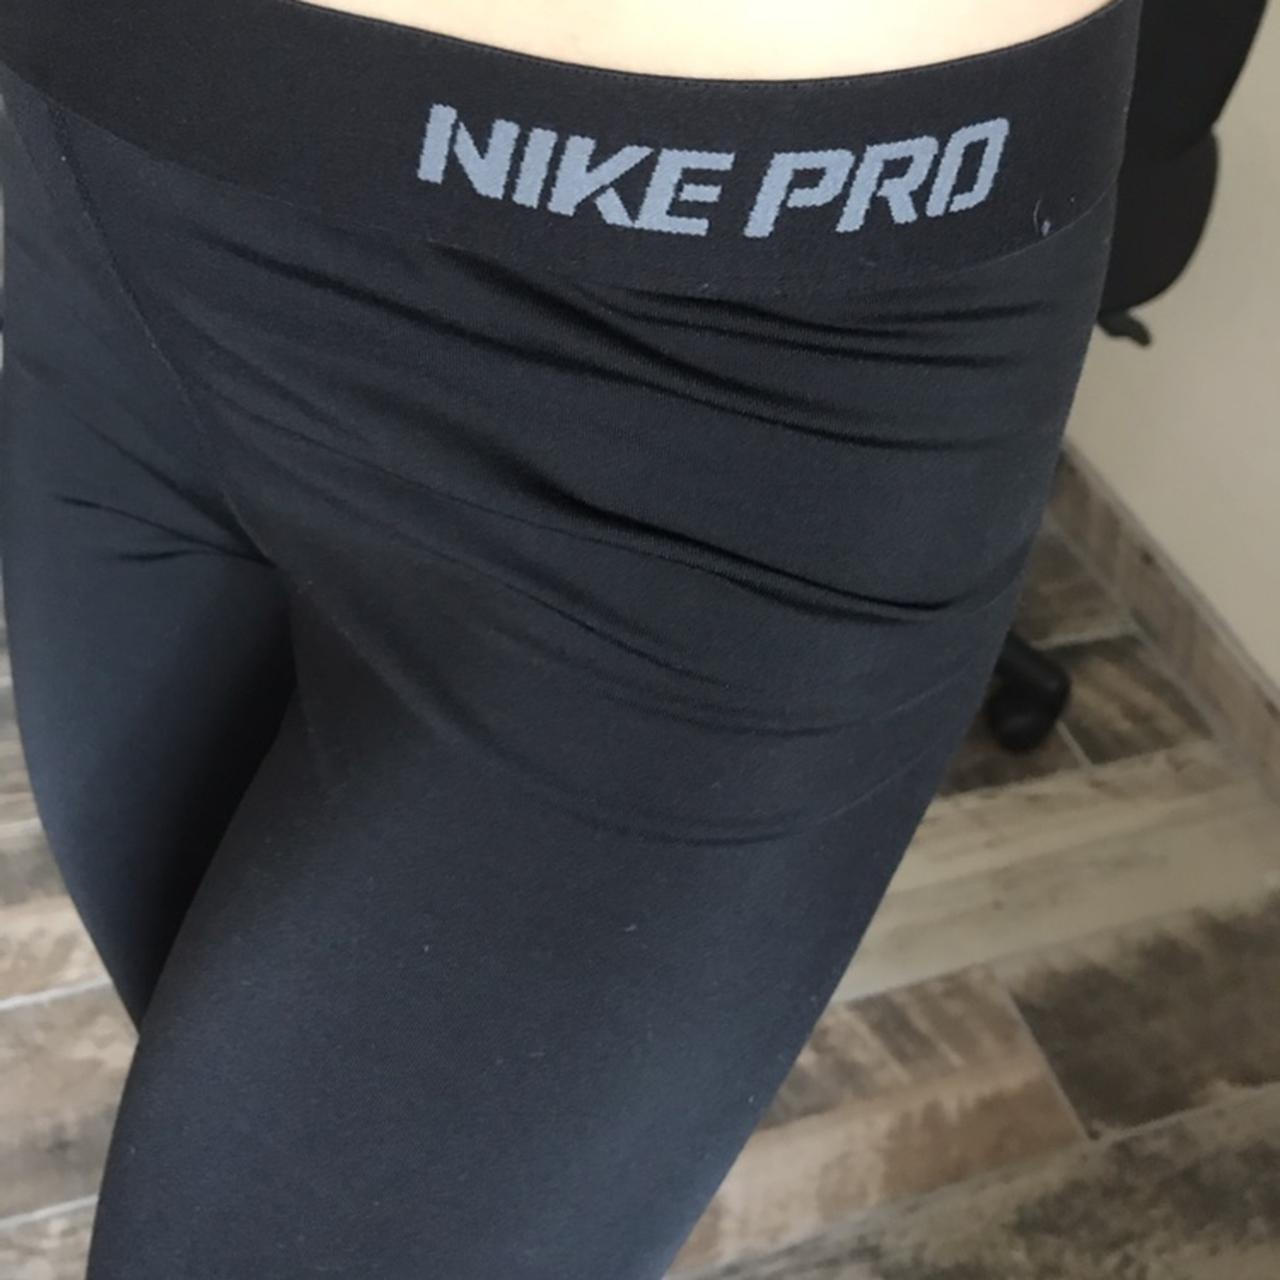 Lightly used Nike-pro workout leggings in great